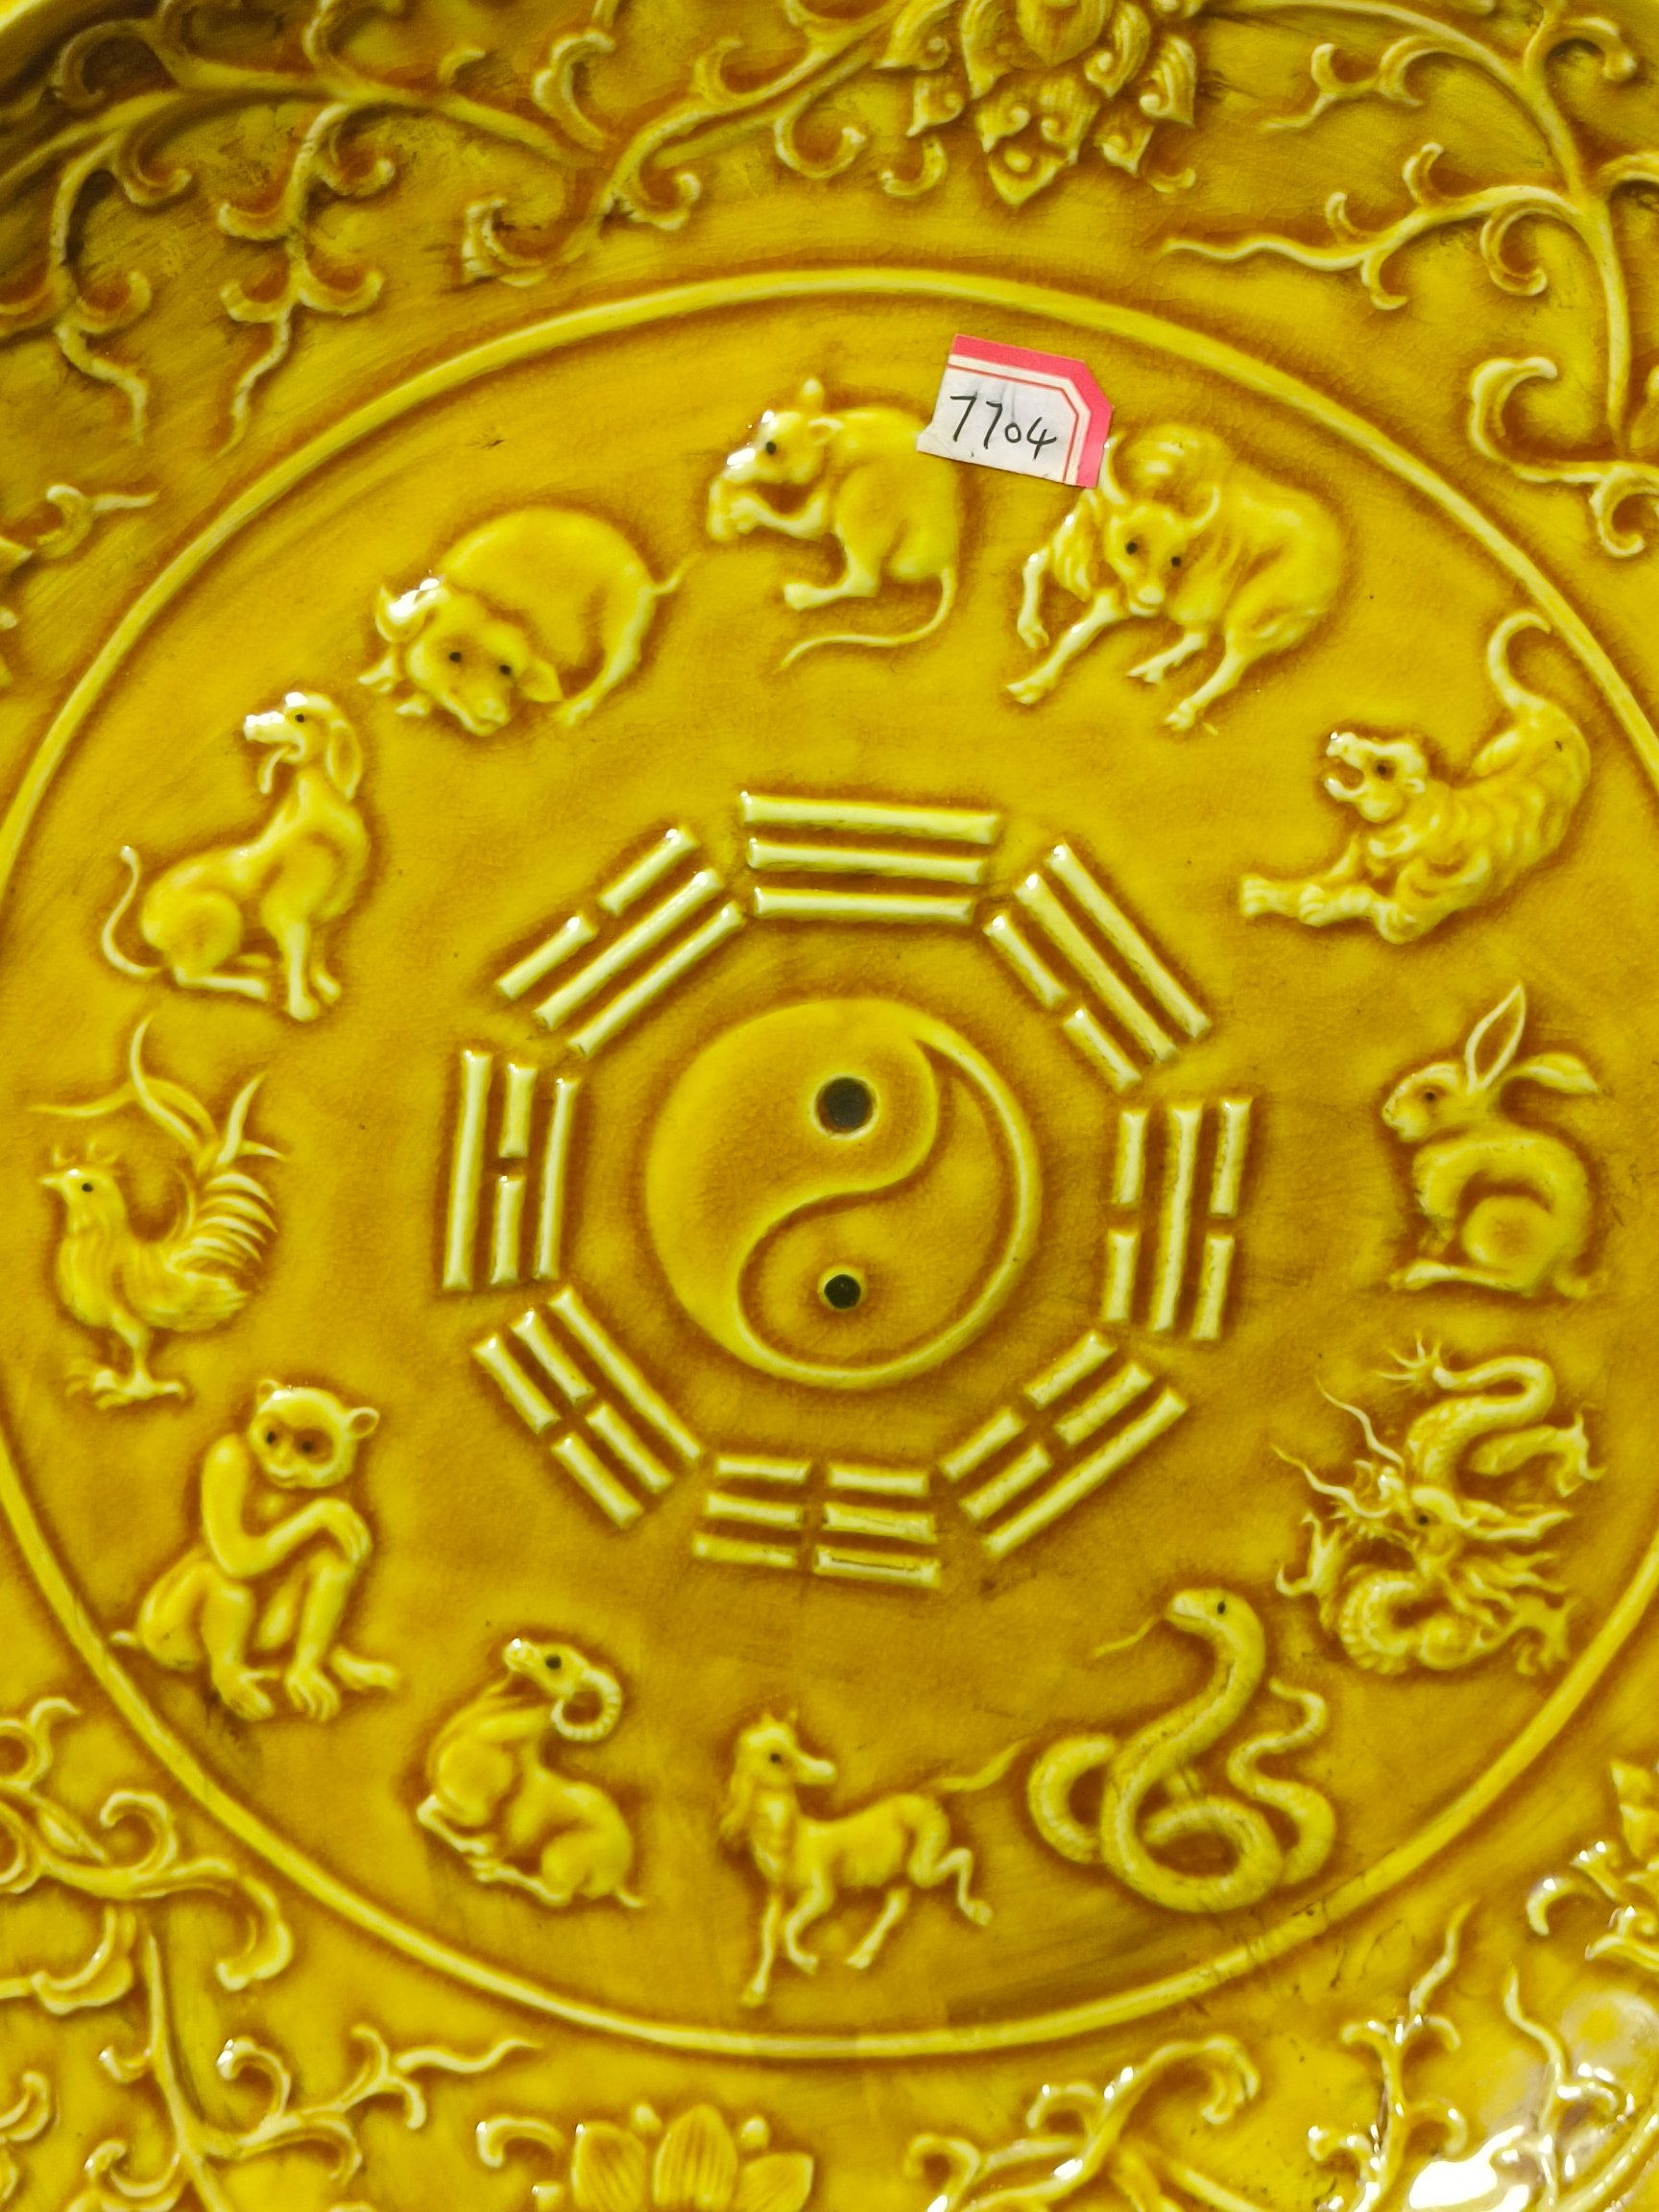 Imperial yellow-glazed porcelain plate with carved [Twelve Zodiac, Bagua] patterns made in the Hongz - Image 4 of 8